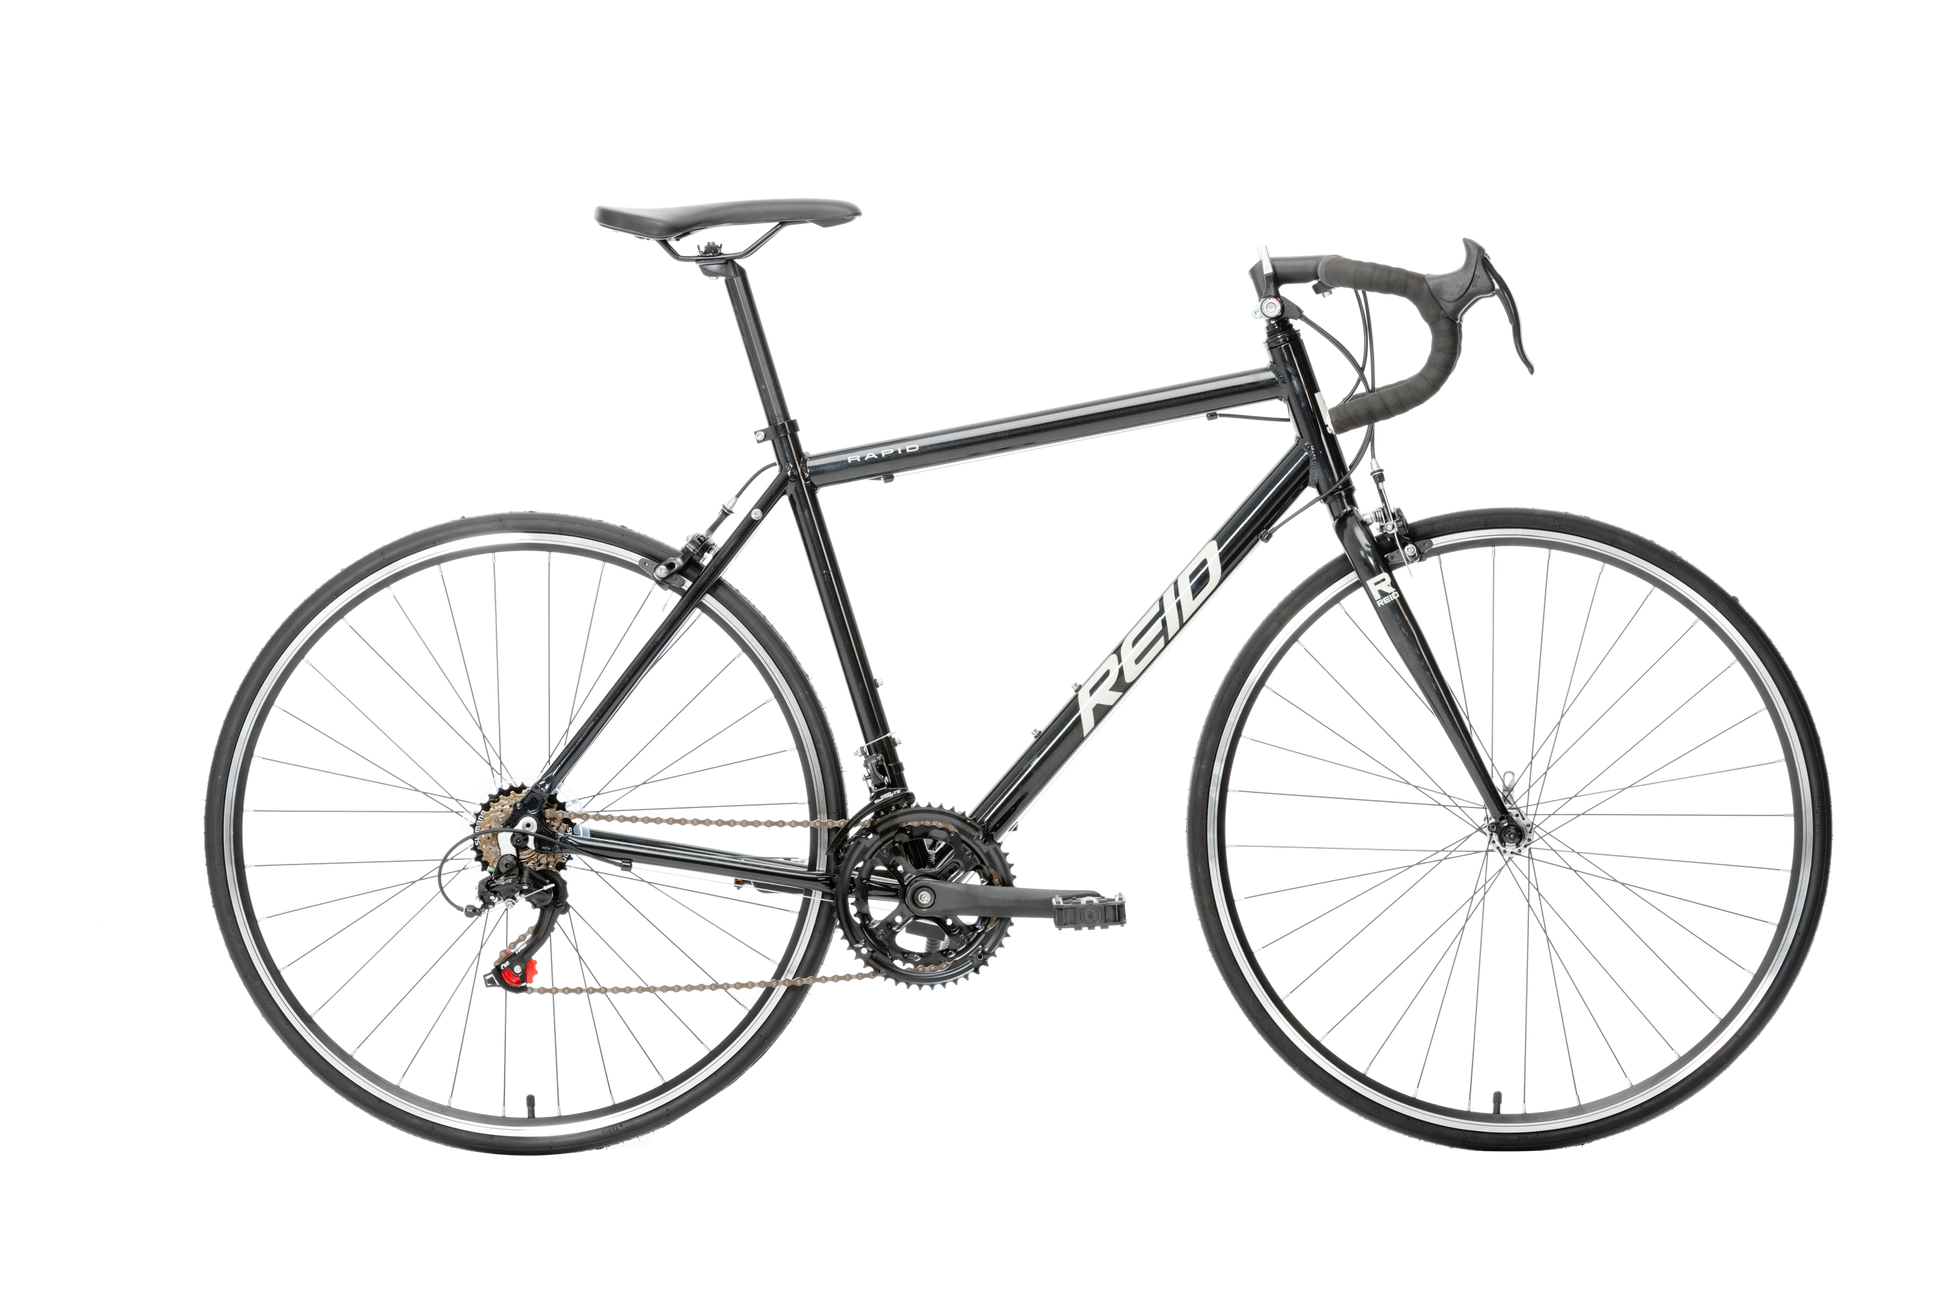 Rapid Dropbar Road Bike in black with Shimano 7-speed gearing from Reid Cycles Australia